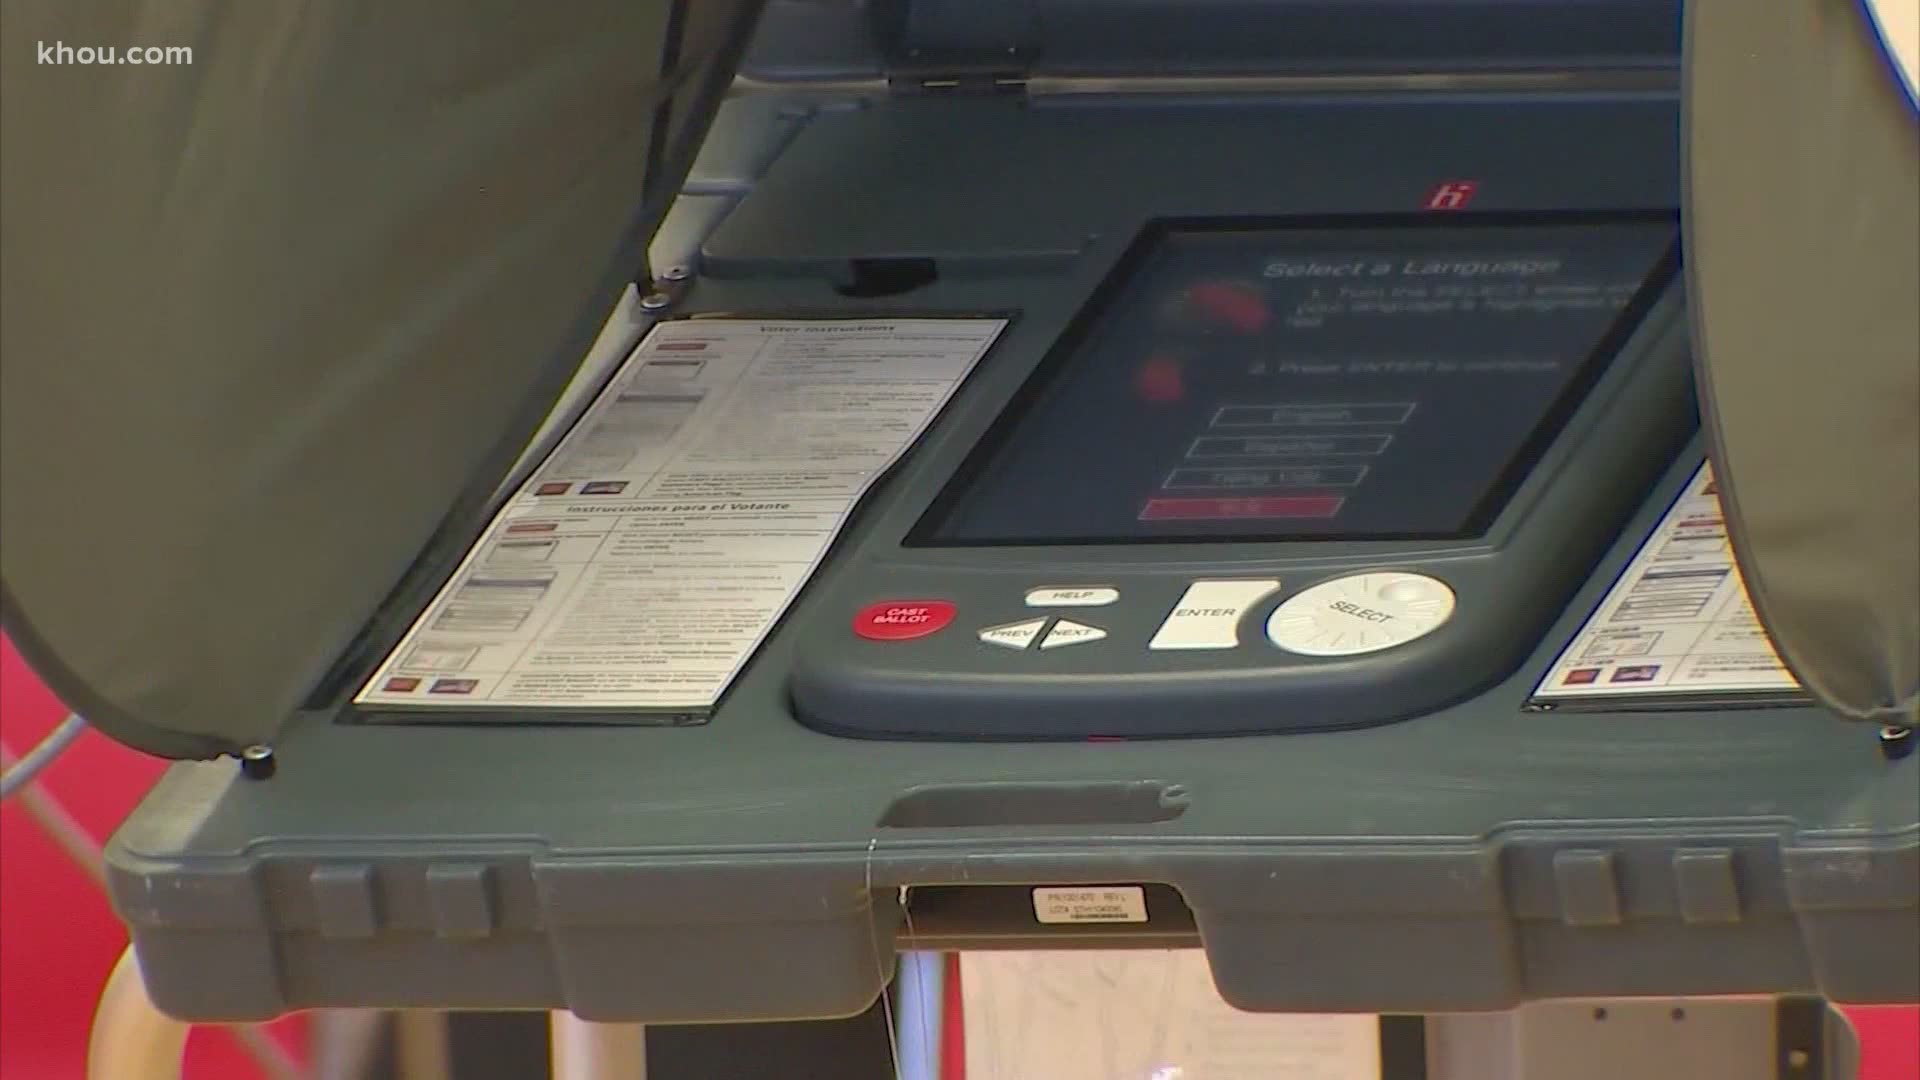 A U.S. district judge has blocked the state from eliminating straight-ticket voting as an option for people who go to the polls this November.